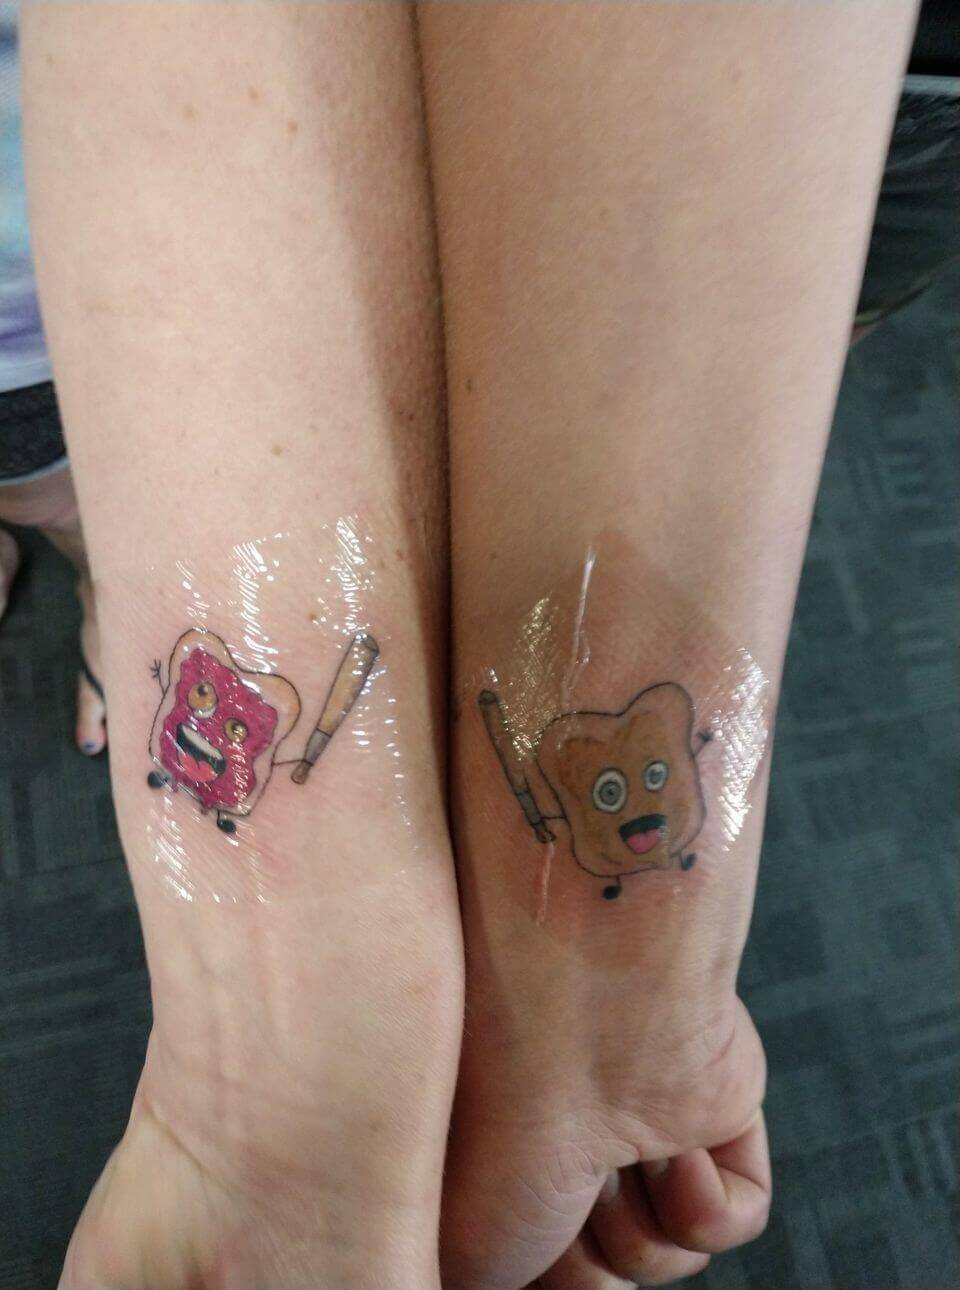 Peanut Butter and Jelly Tattoo 51 Ideas For Peanut Butter and Jelly Tattoos: The Latest Trend in Body Art